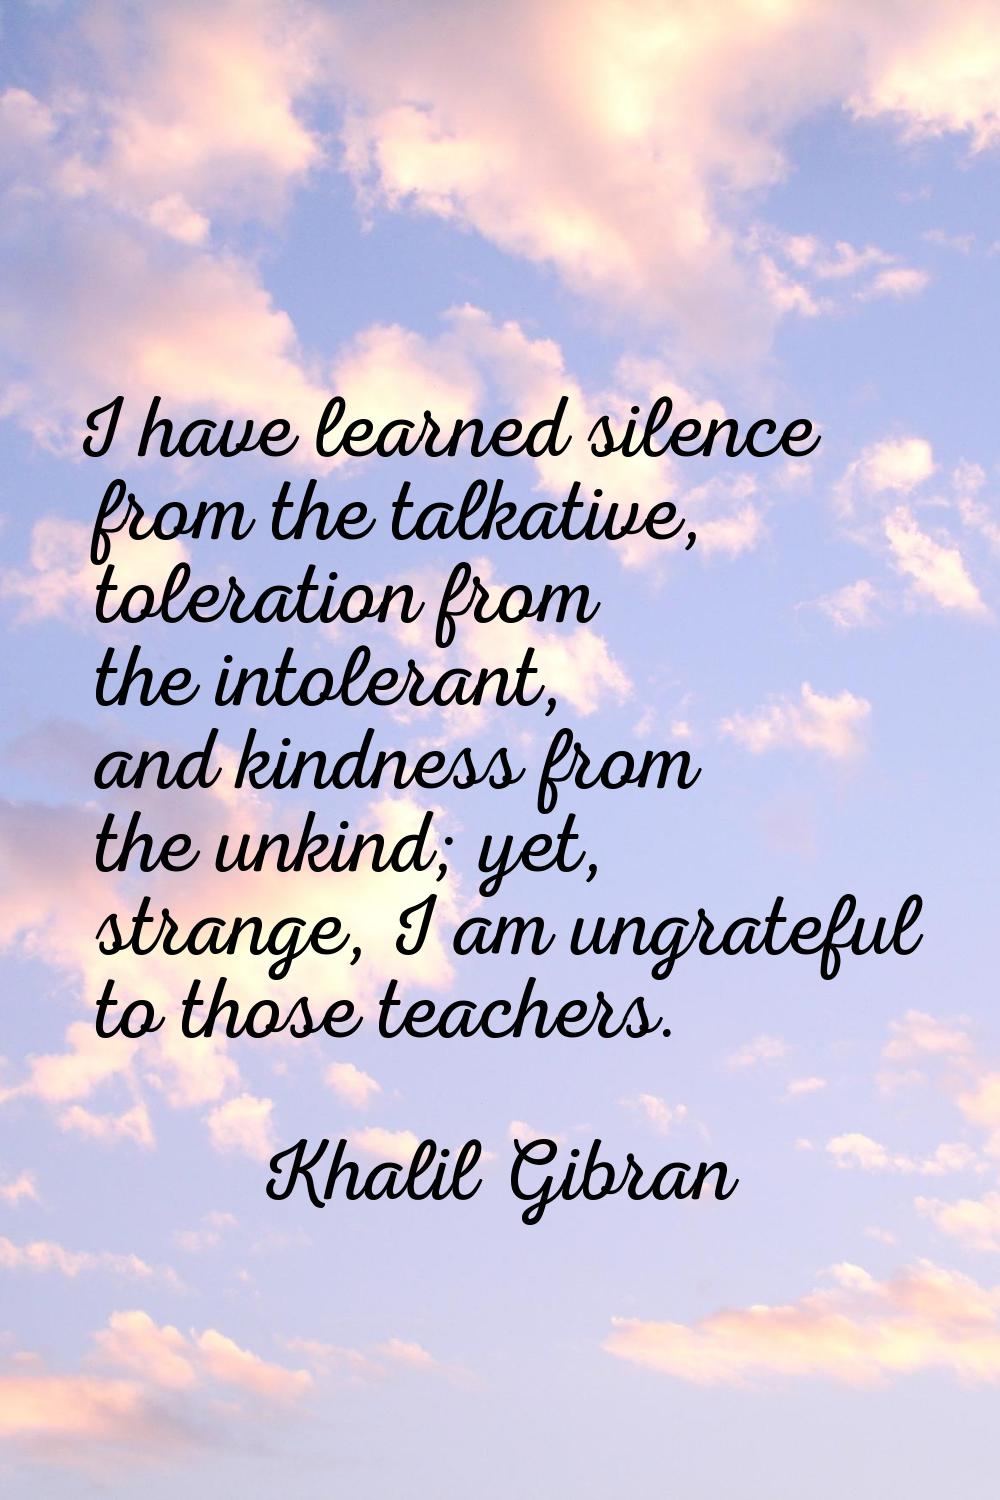 I have learned silence from the talkative, toleration from the intolerant, and kindness from the un